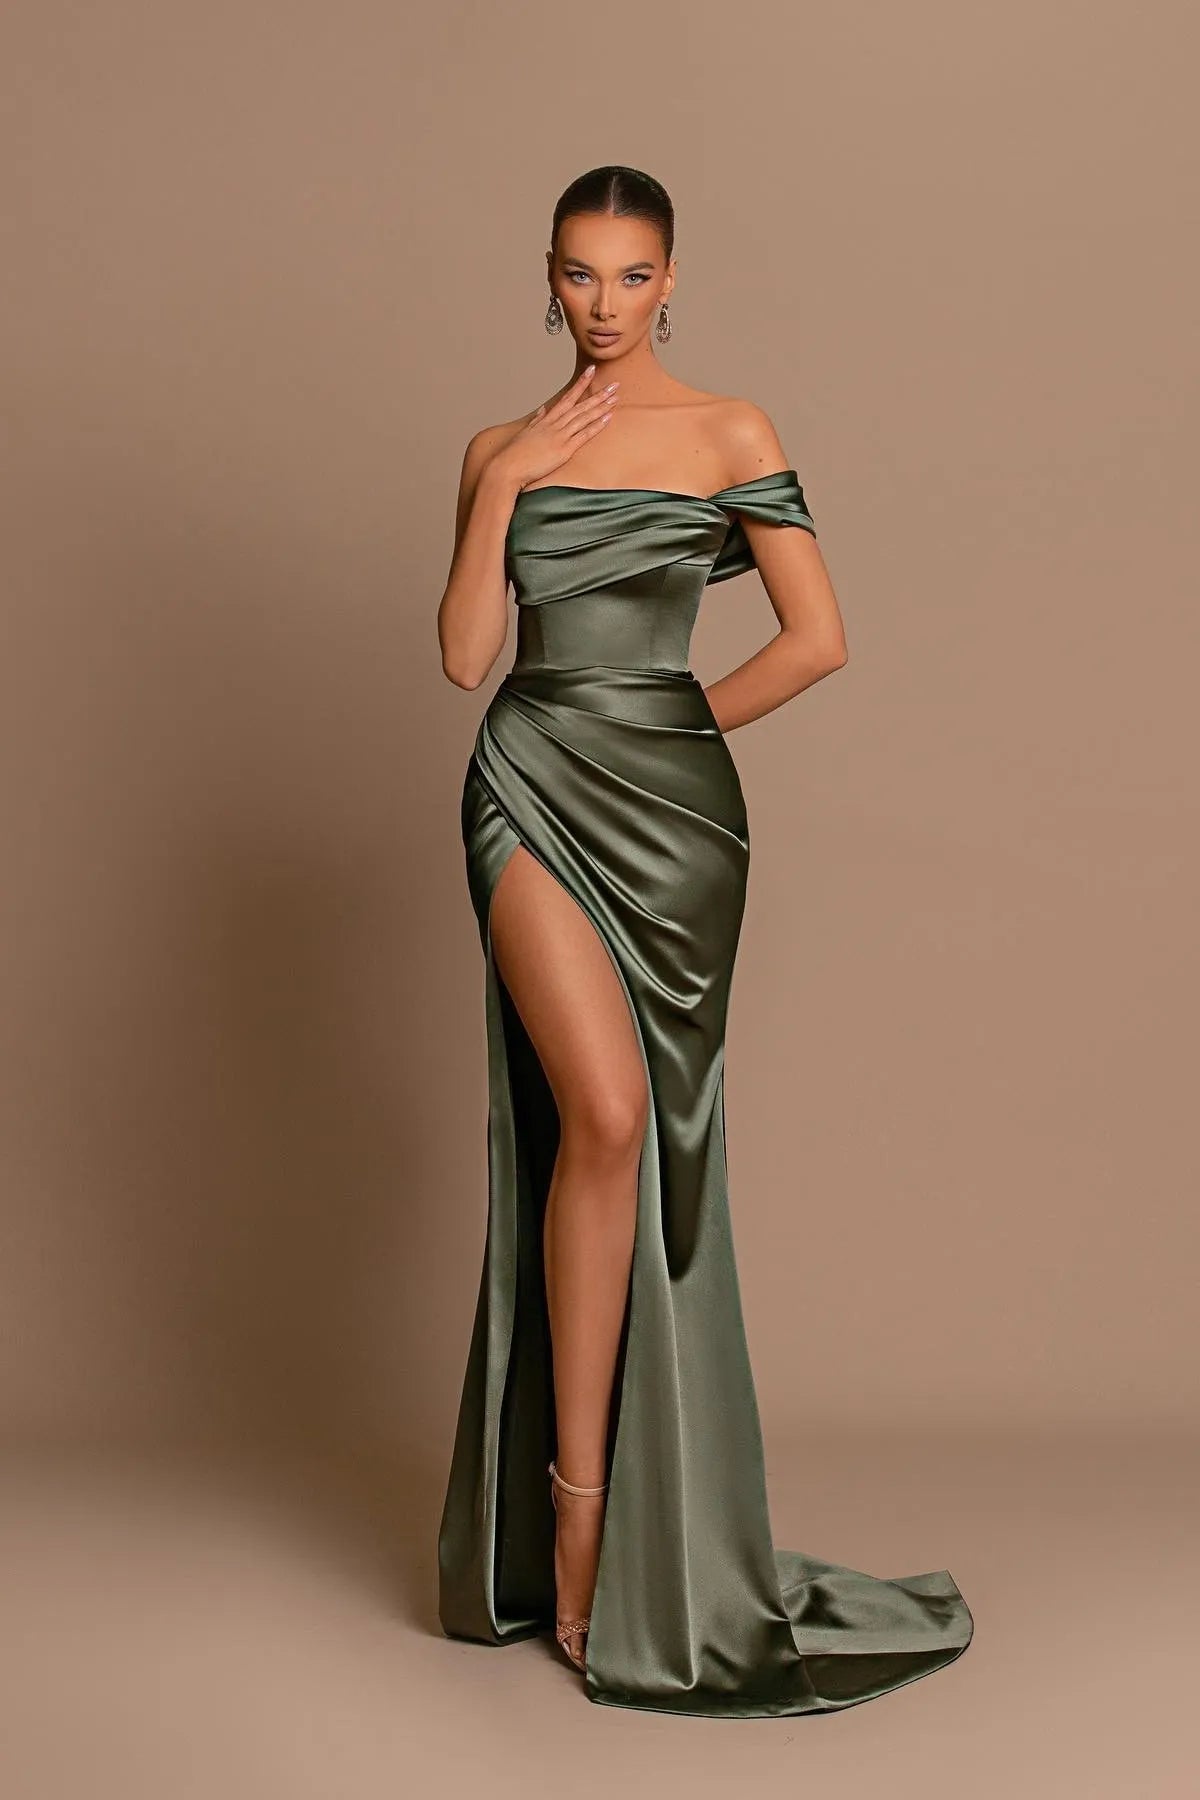 Sexy One-Shoulder Mermaid Evening Dress High Slit Off the Shoulder Sleeve Classic Formal Prom Party Wedding Dress